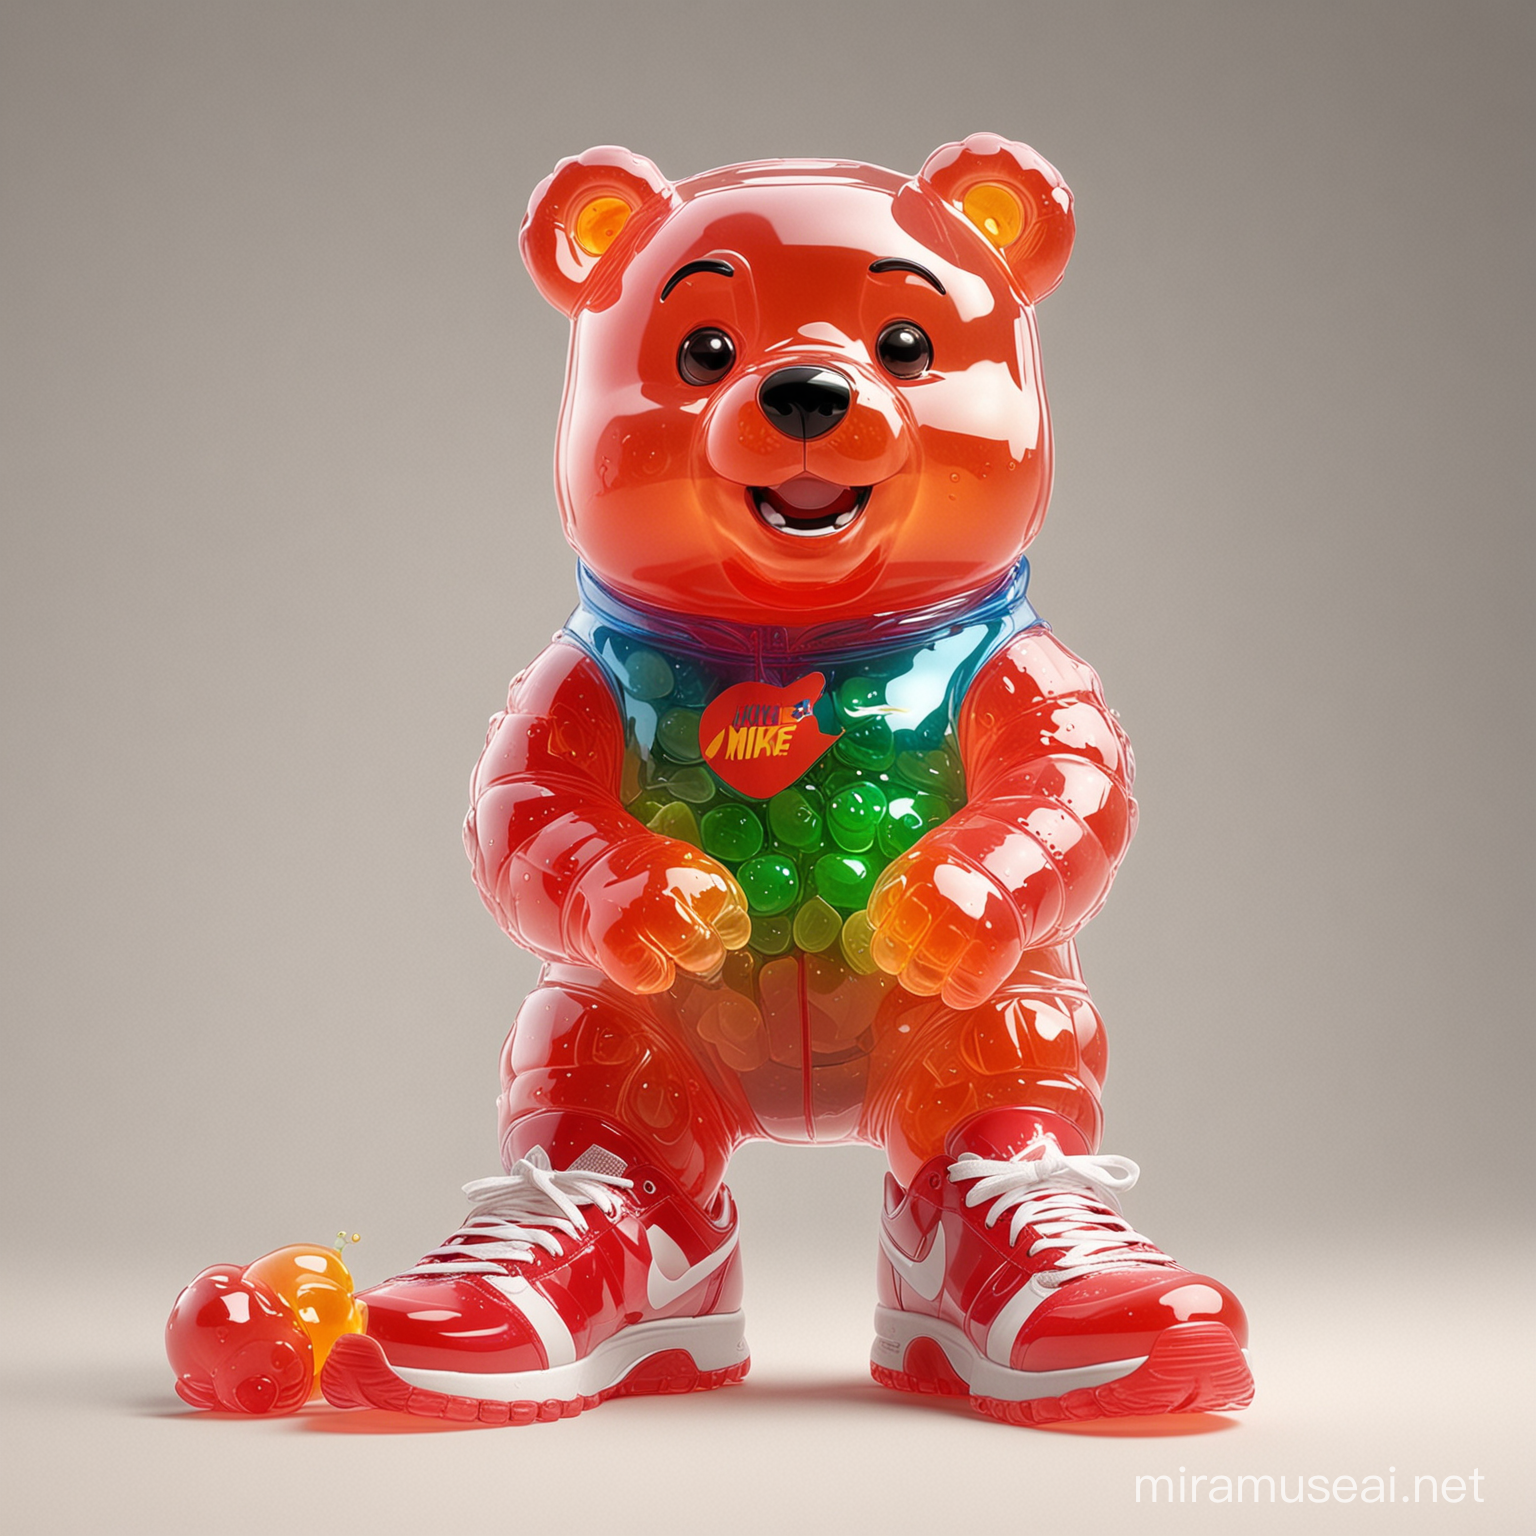 4k Funny transparent talking gummy bear meme wear nike sneakers with a neutral background